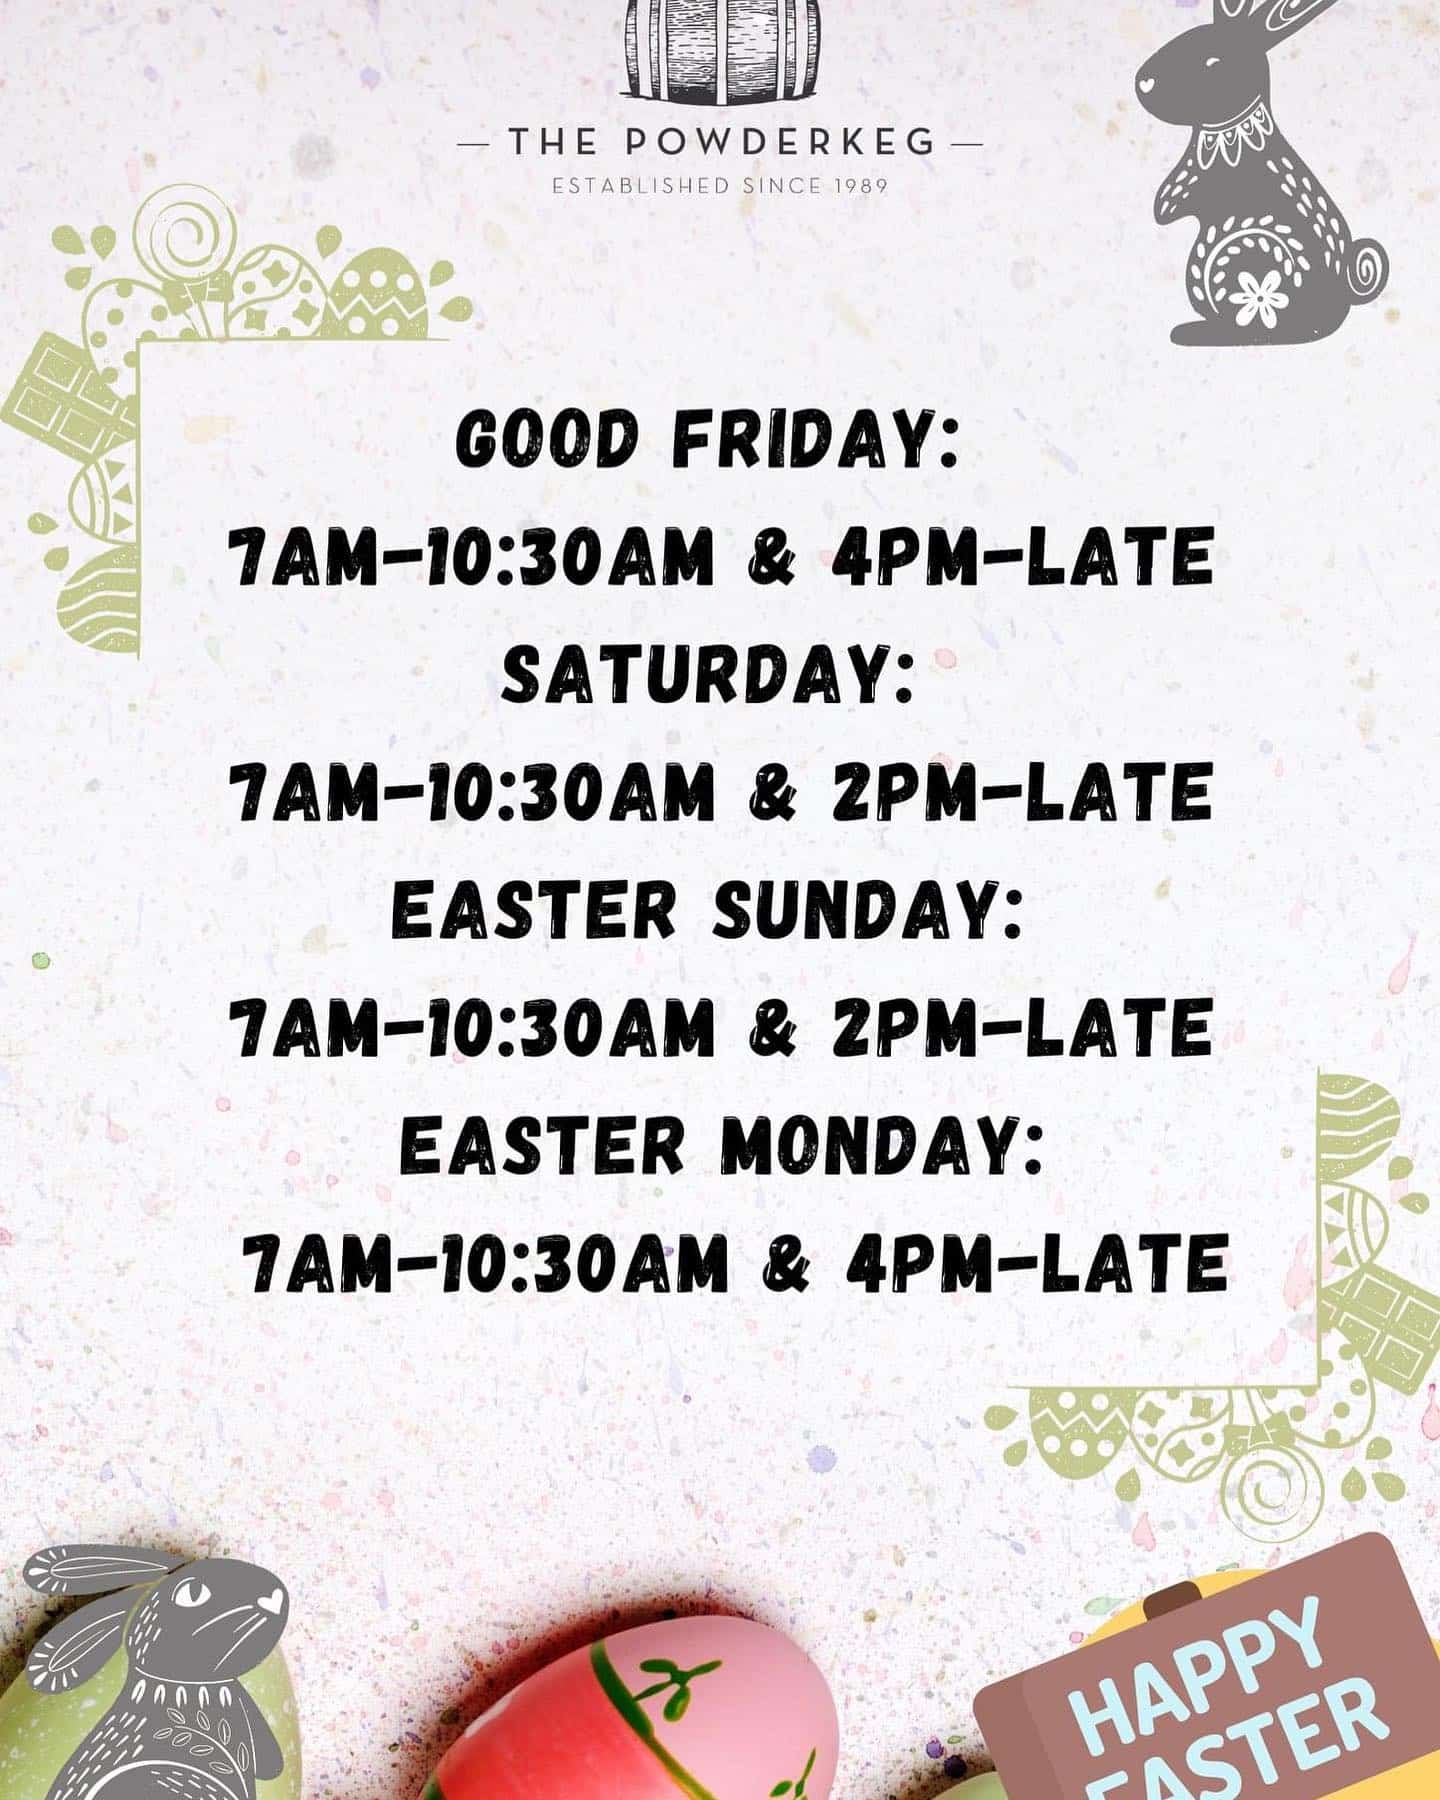 ⏰📅🐣🐣🐣🐣
💥Check out our Easter opening hours!!💥
 🐰🐰🐰🐰

We will be working all weekend long to make sure you are fed and taken care of! 
📌Please note there are some trading laws around Easter, if you would like to come and have a drink Friday or Sunday you must be dining with us...🍔🍕🍟🍳🥩🍻

😎See you all at The Keg !🎉